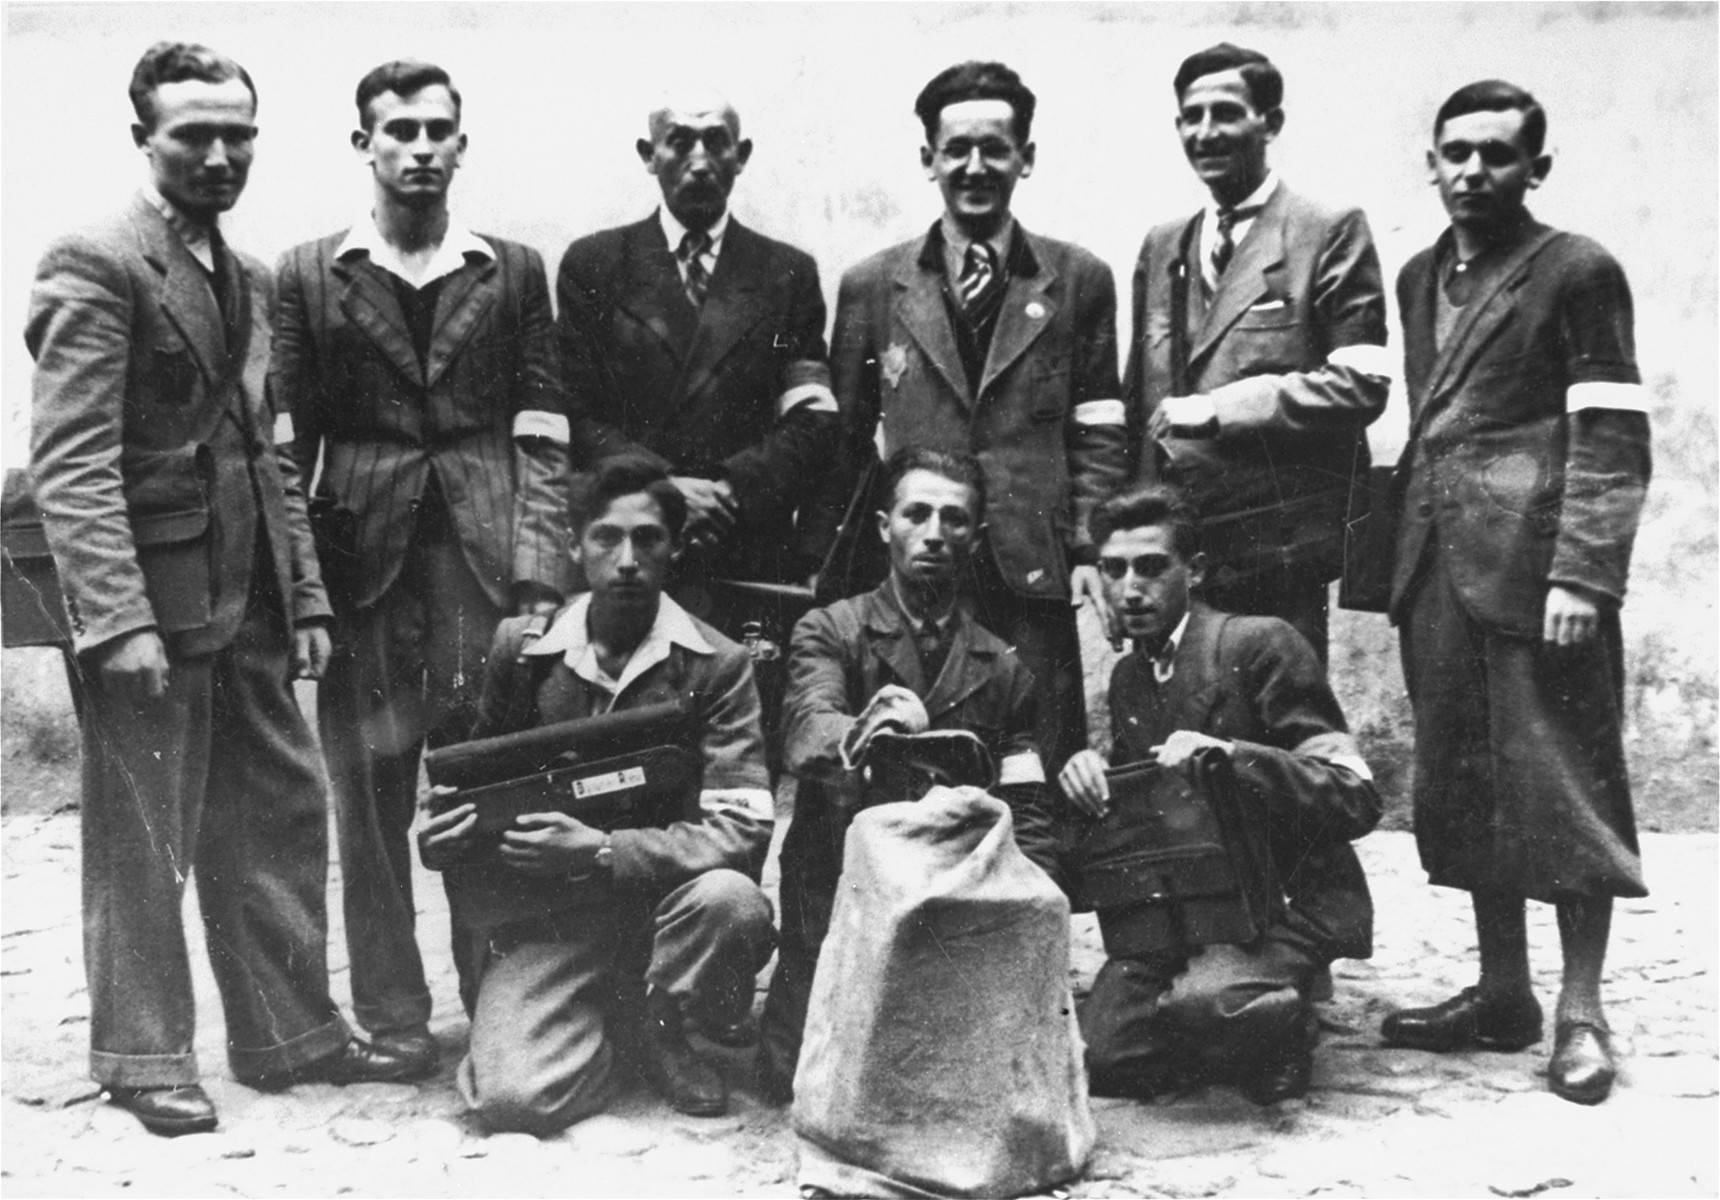 Group portrait of employees in the Lodz ghetto post office.  

Among those pictured is Nachman Zonabend (standing second from the right).